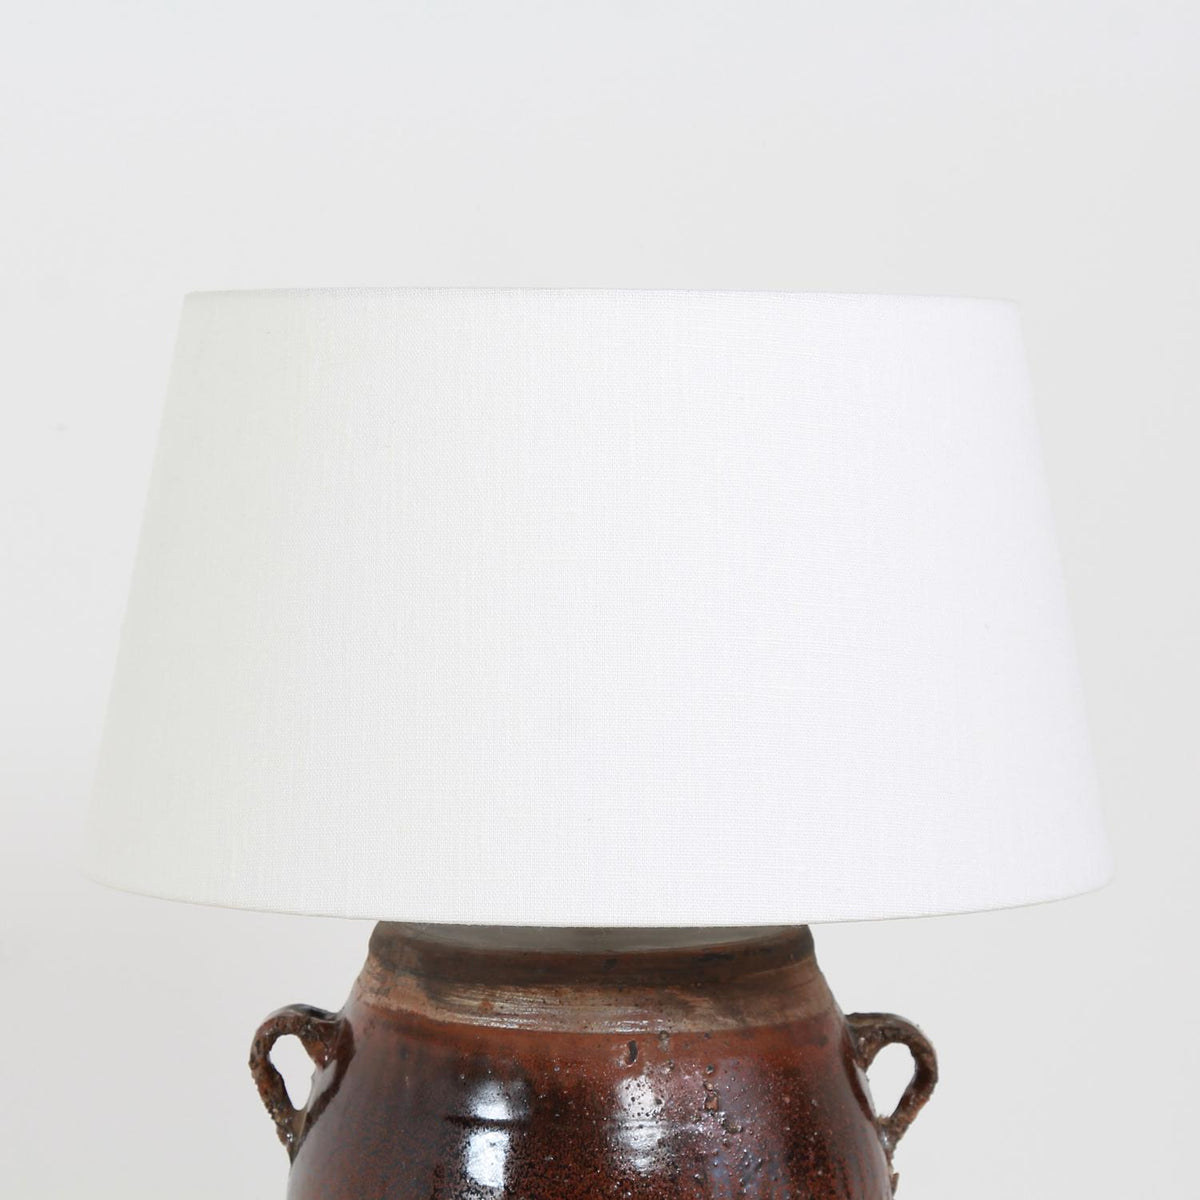 AUTHENTIC GLAZED TERRACOTTA JAR TABLE LAMP WITH LINEN DRUM SHADE